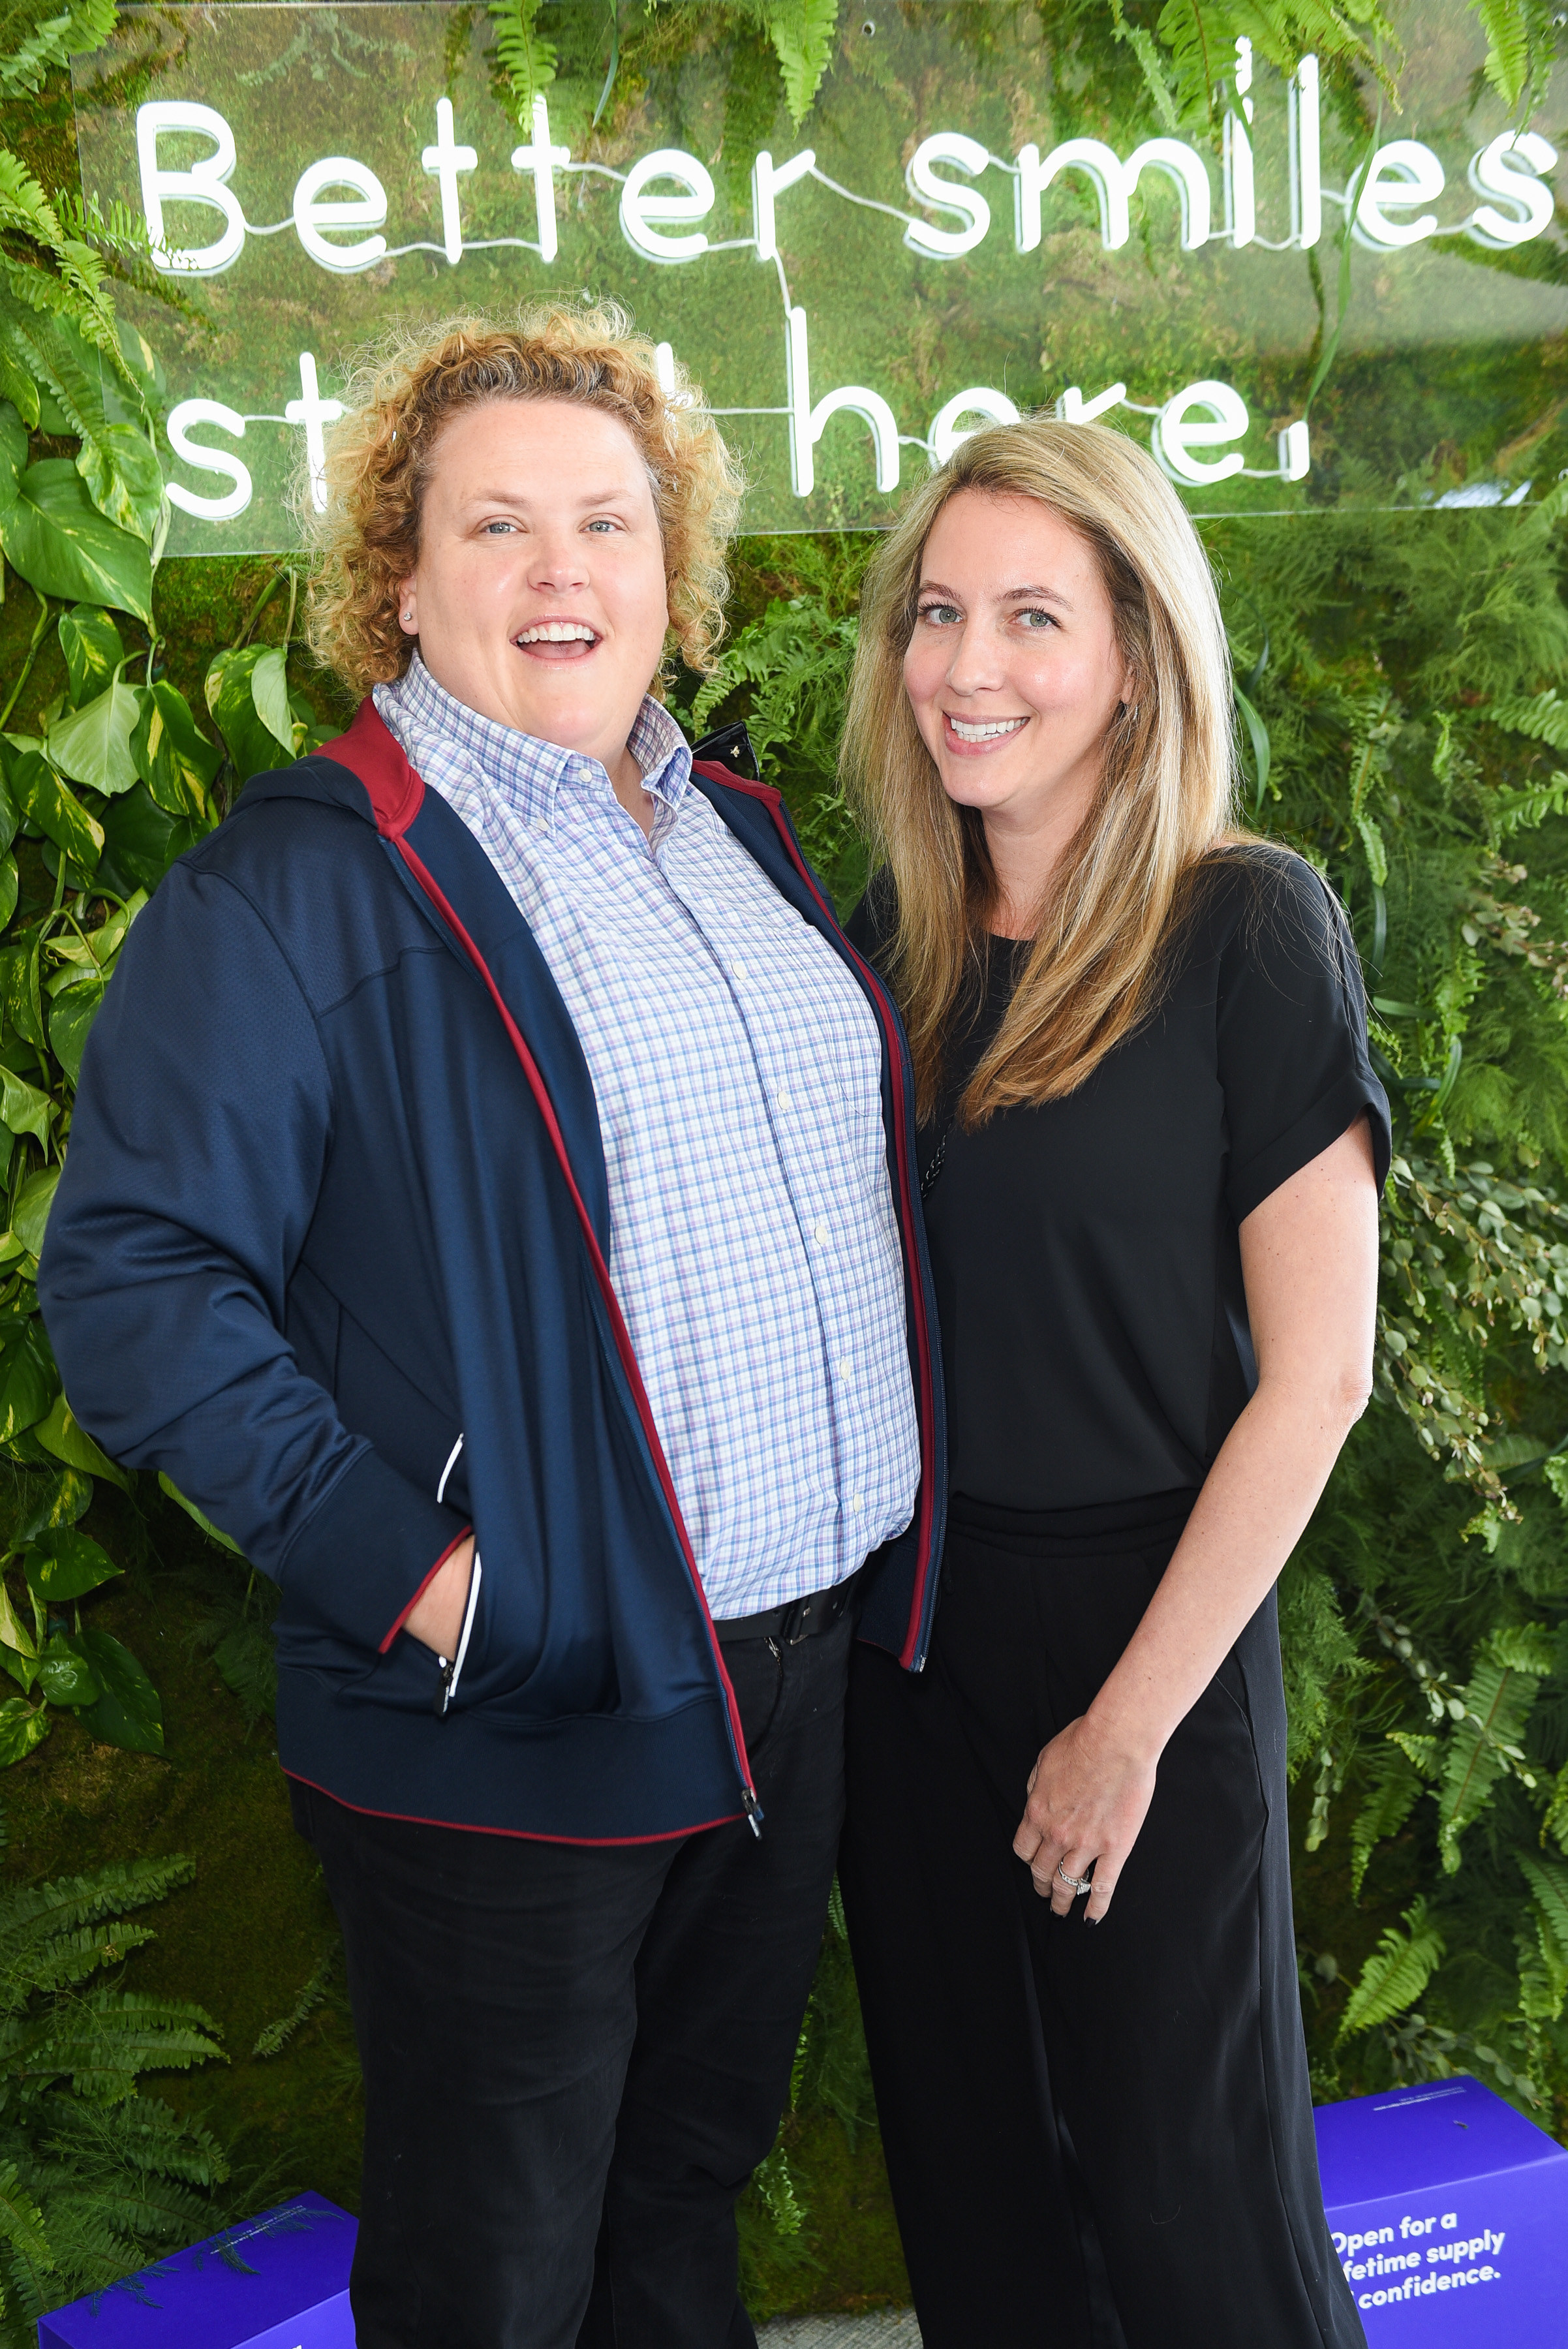 Fortune Feimster and Jacqueline Smith